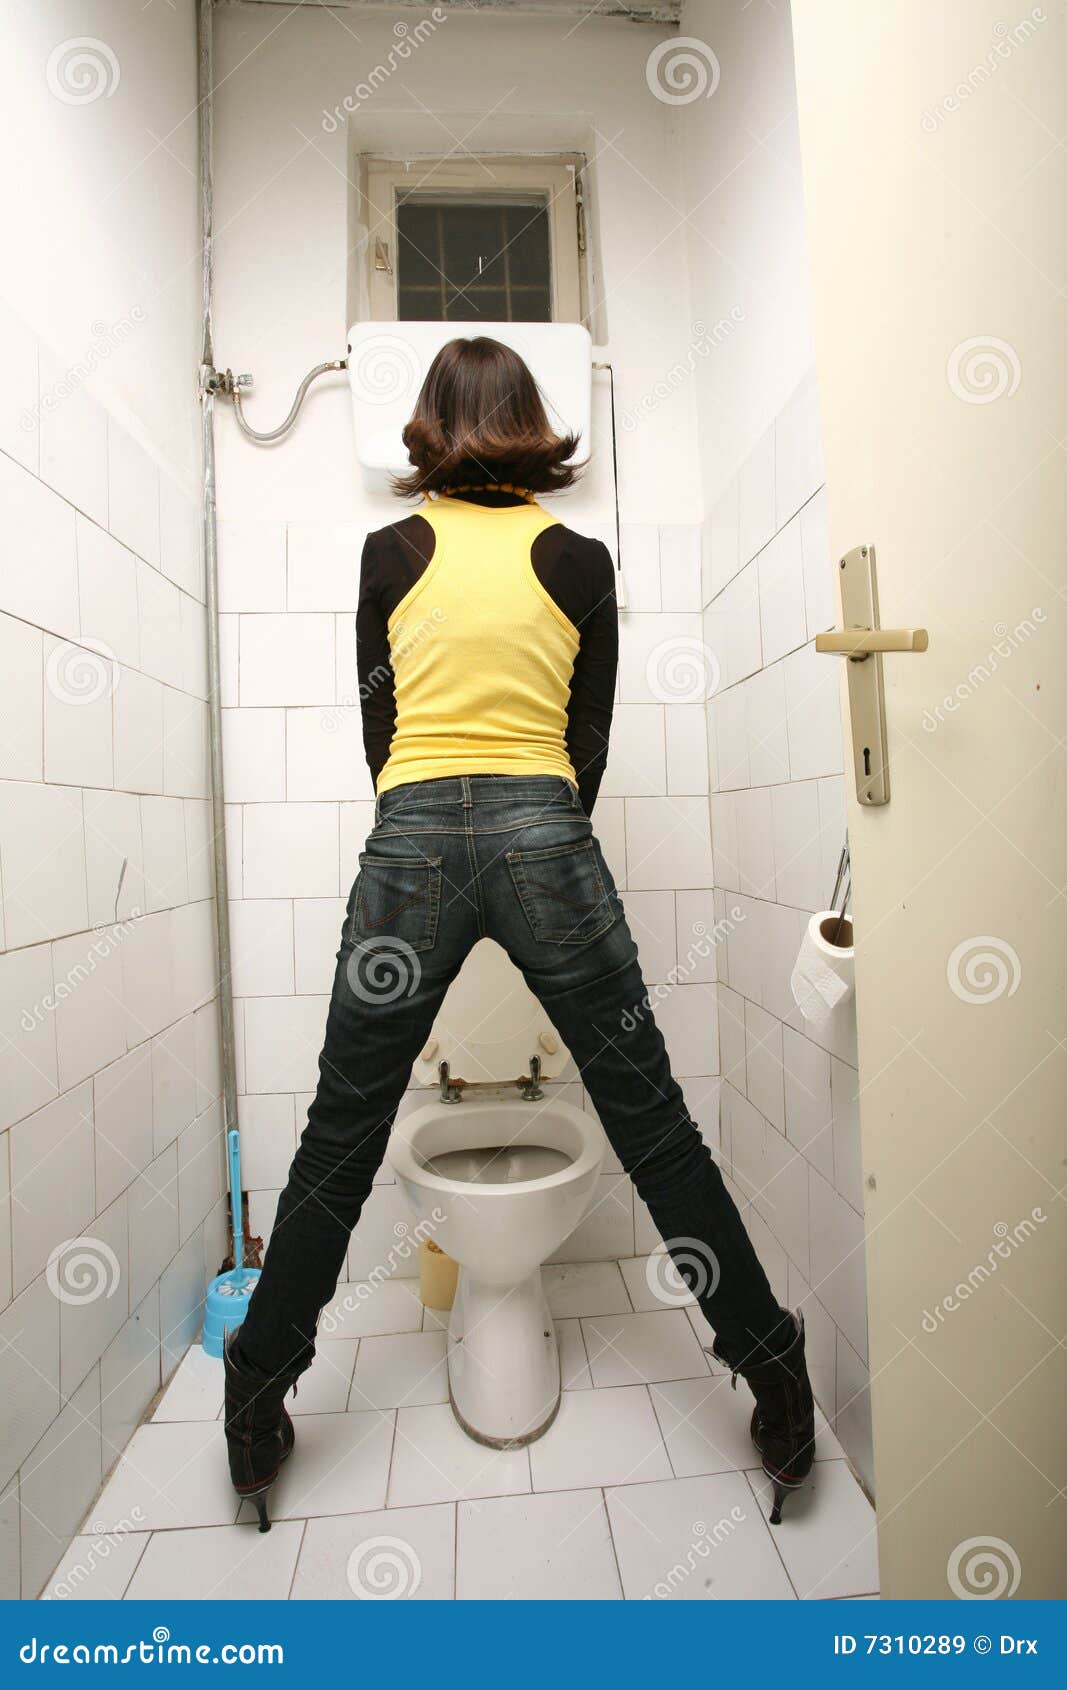 real girls and ladies peeing free hd photo